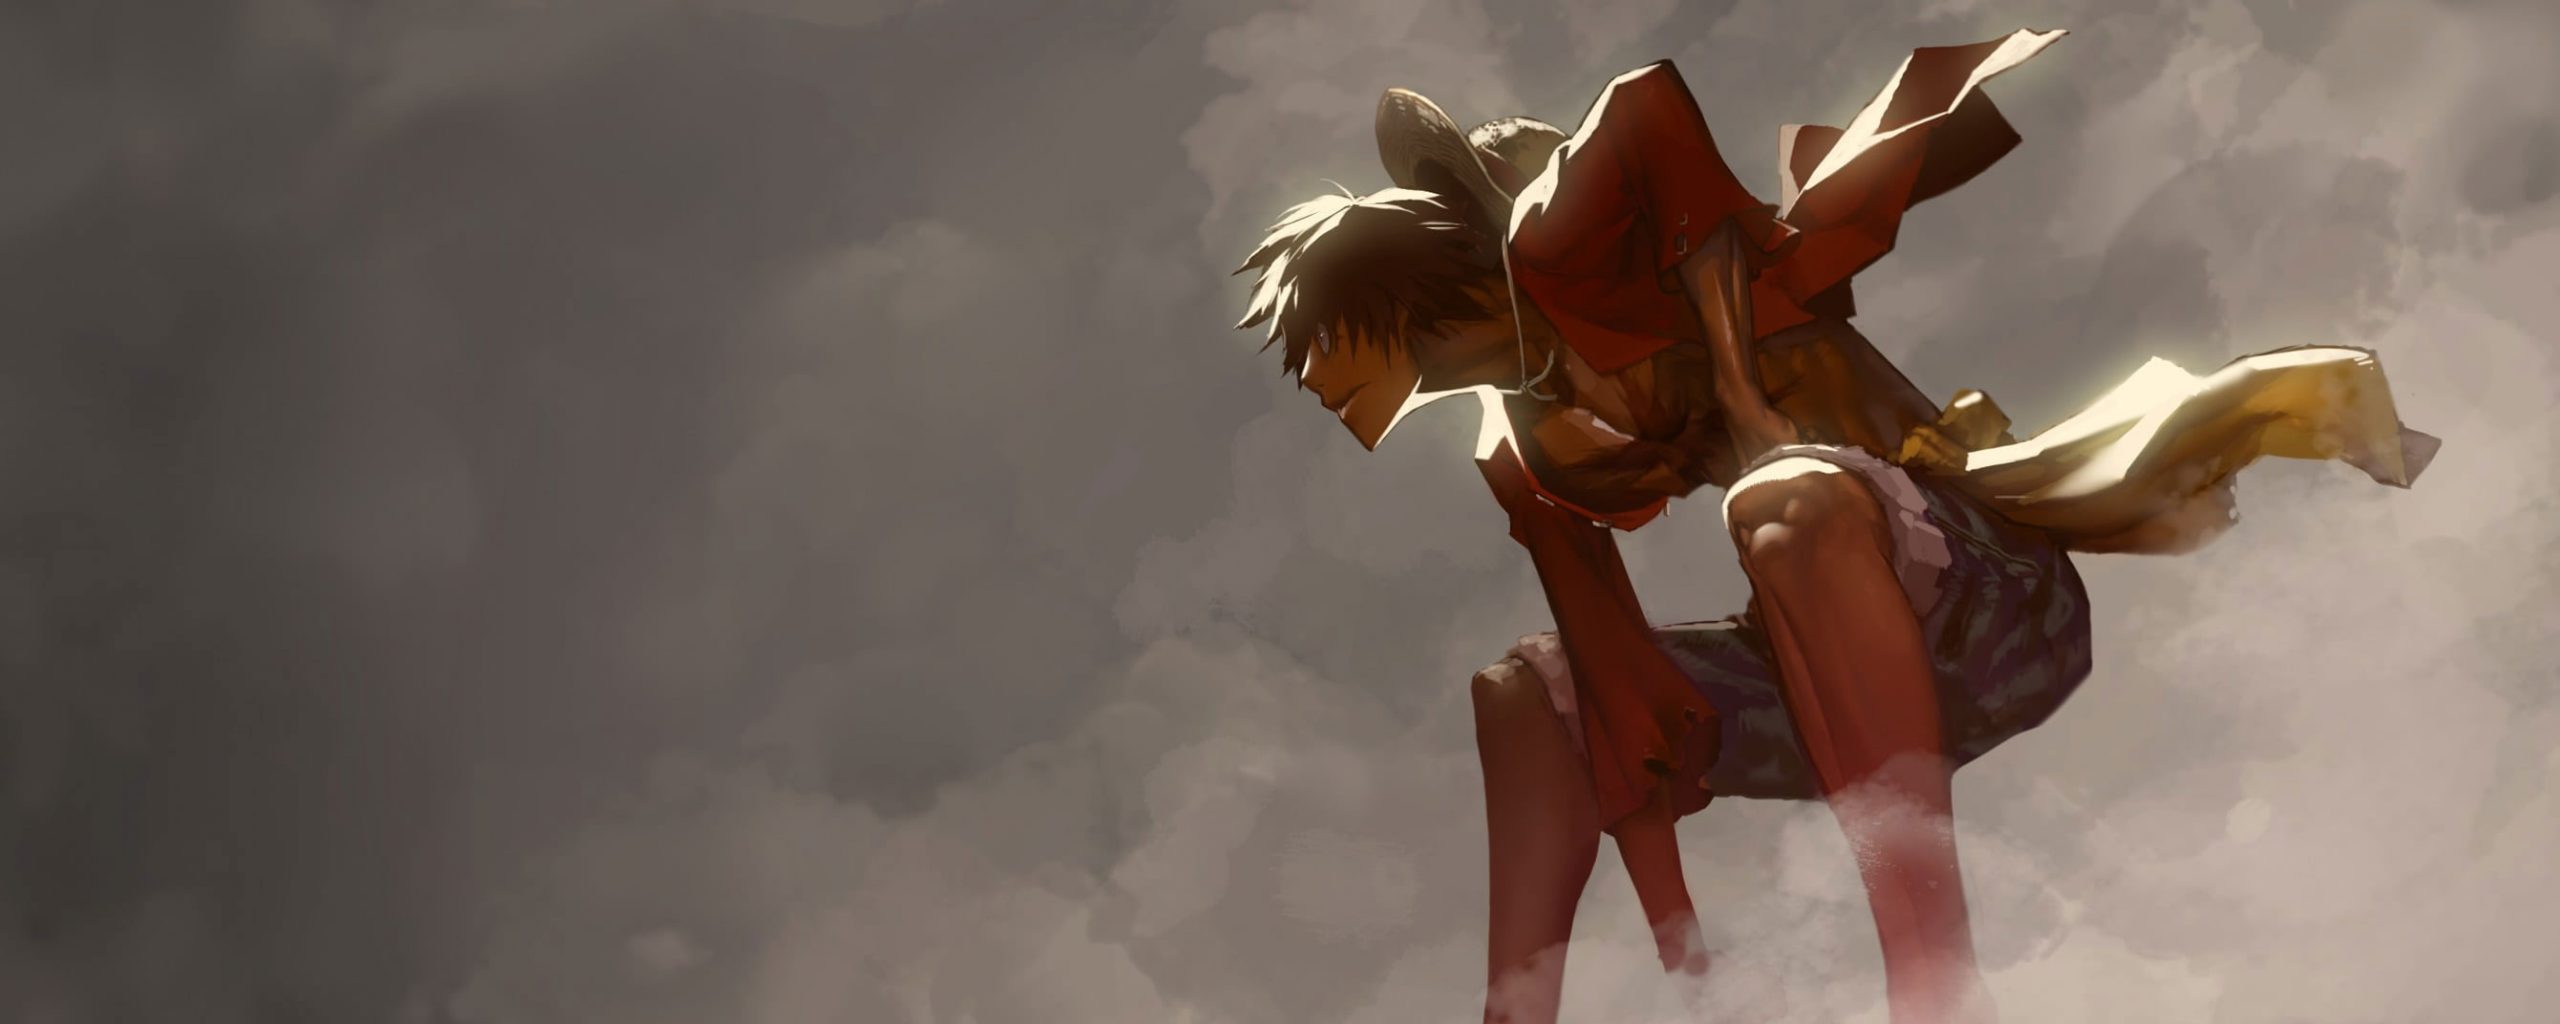 One Piece wallpaper, Monkey D. Luffy, anime boys, cloud - sky, low angle view